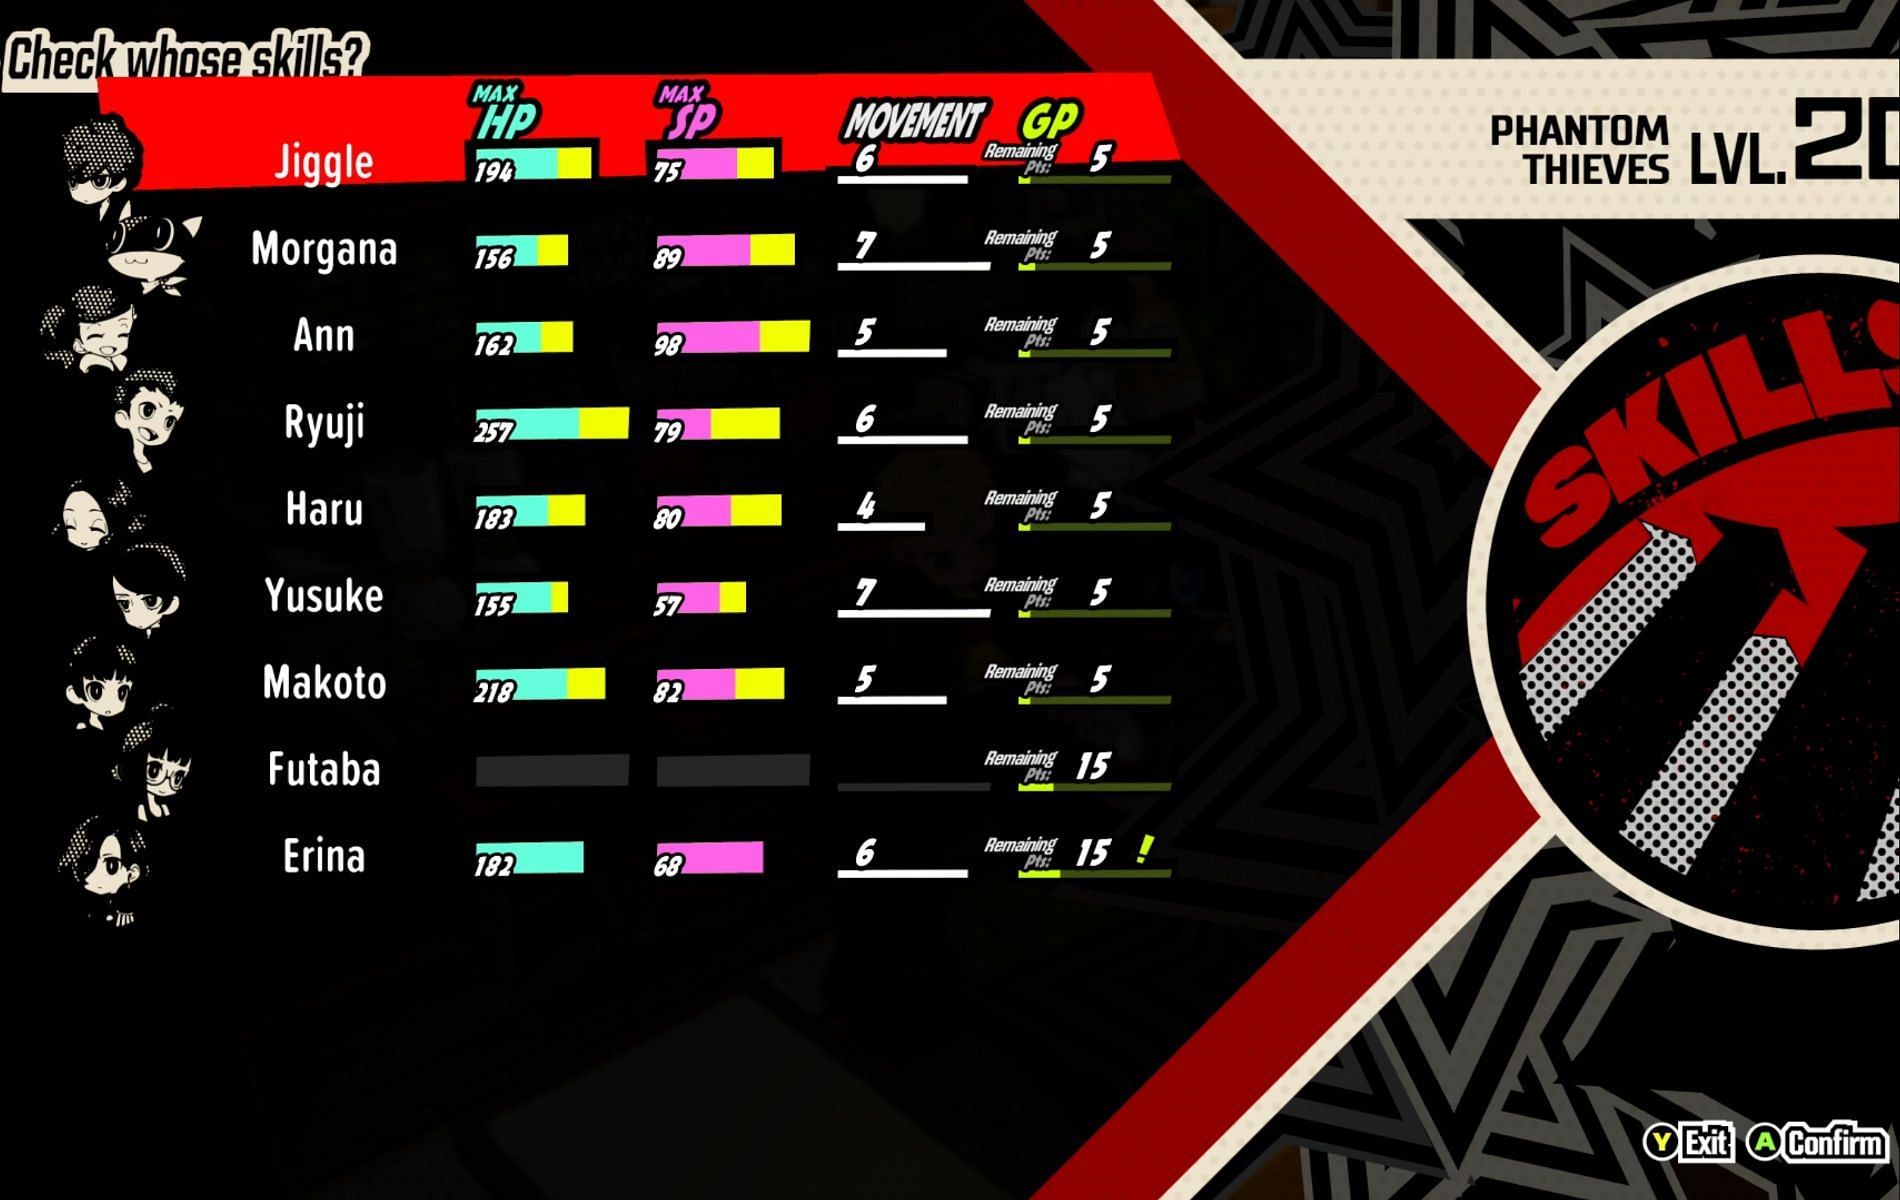 Persona 5 tactica Growth Points (GP)